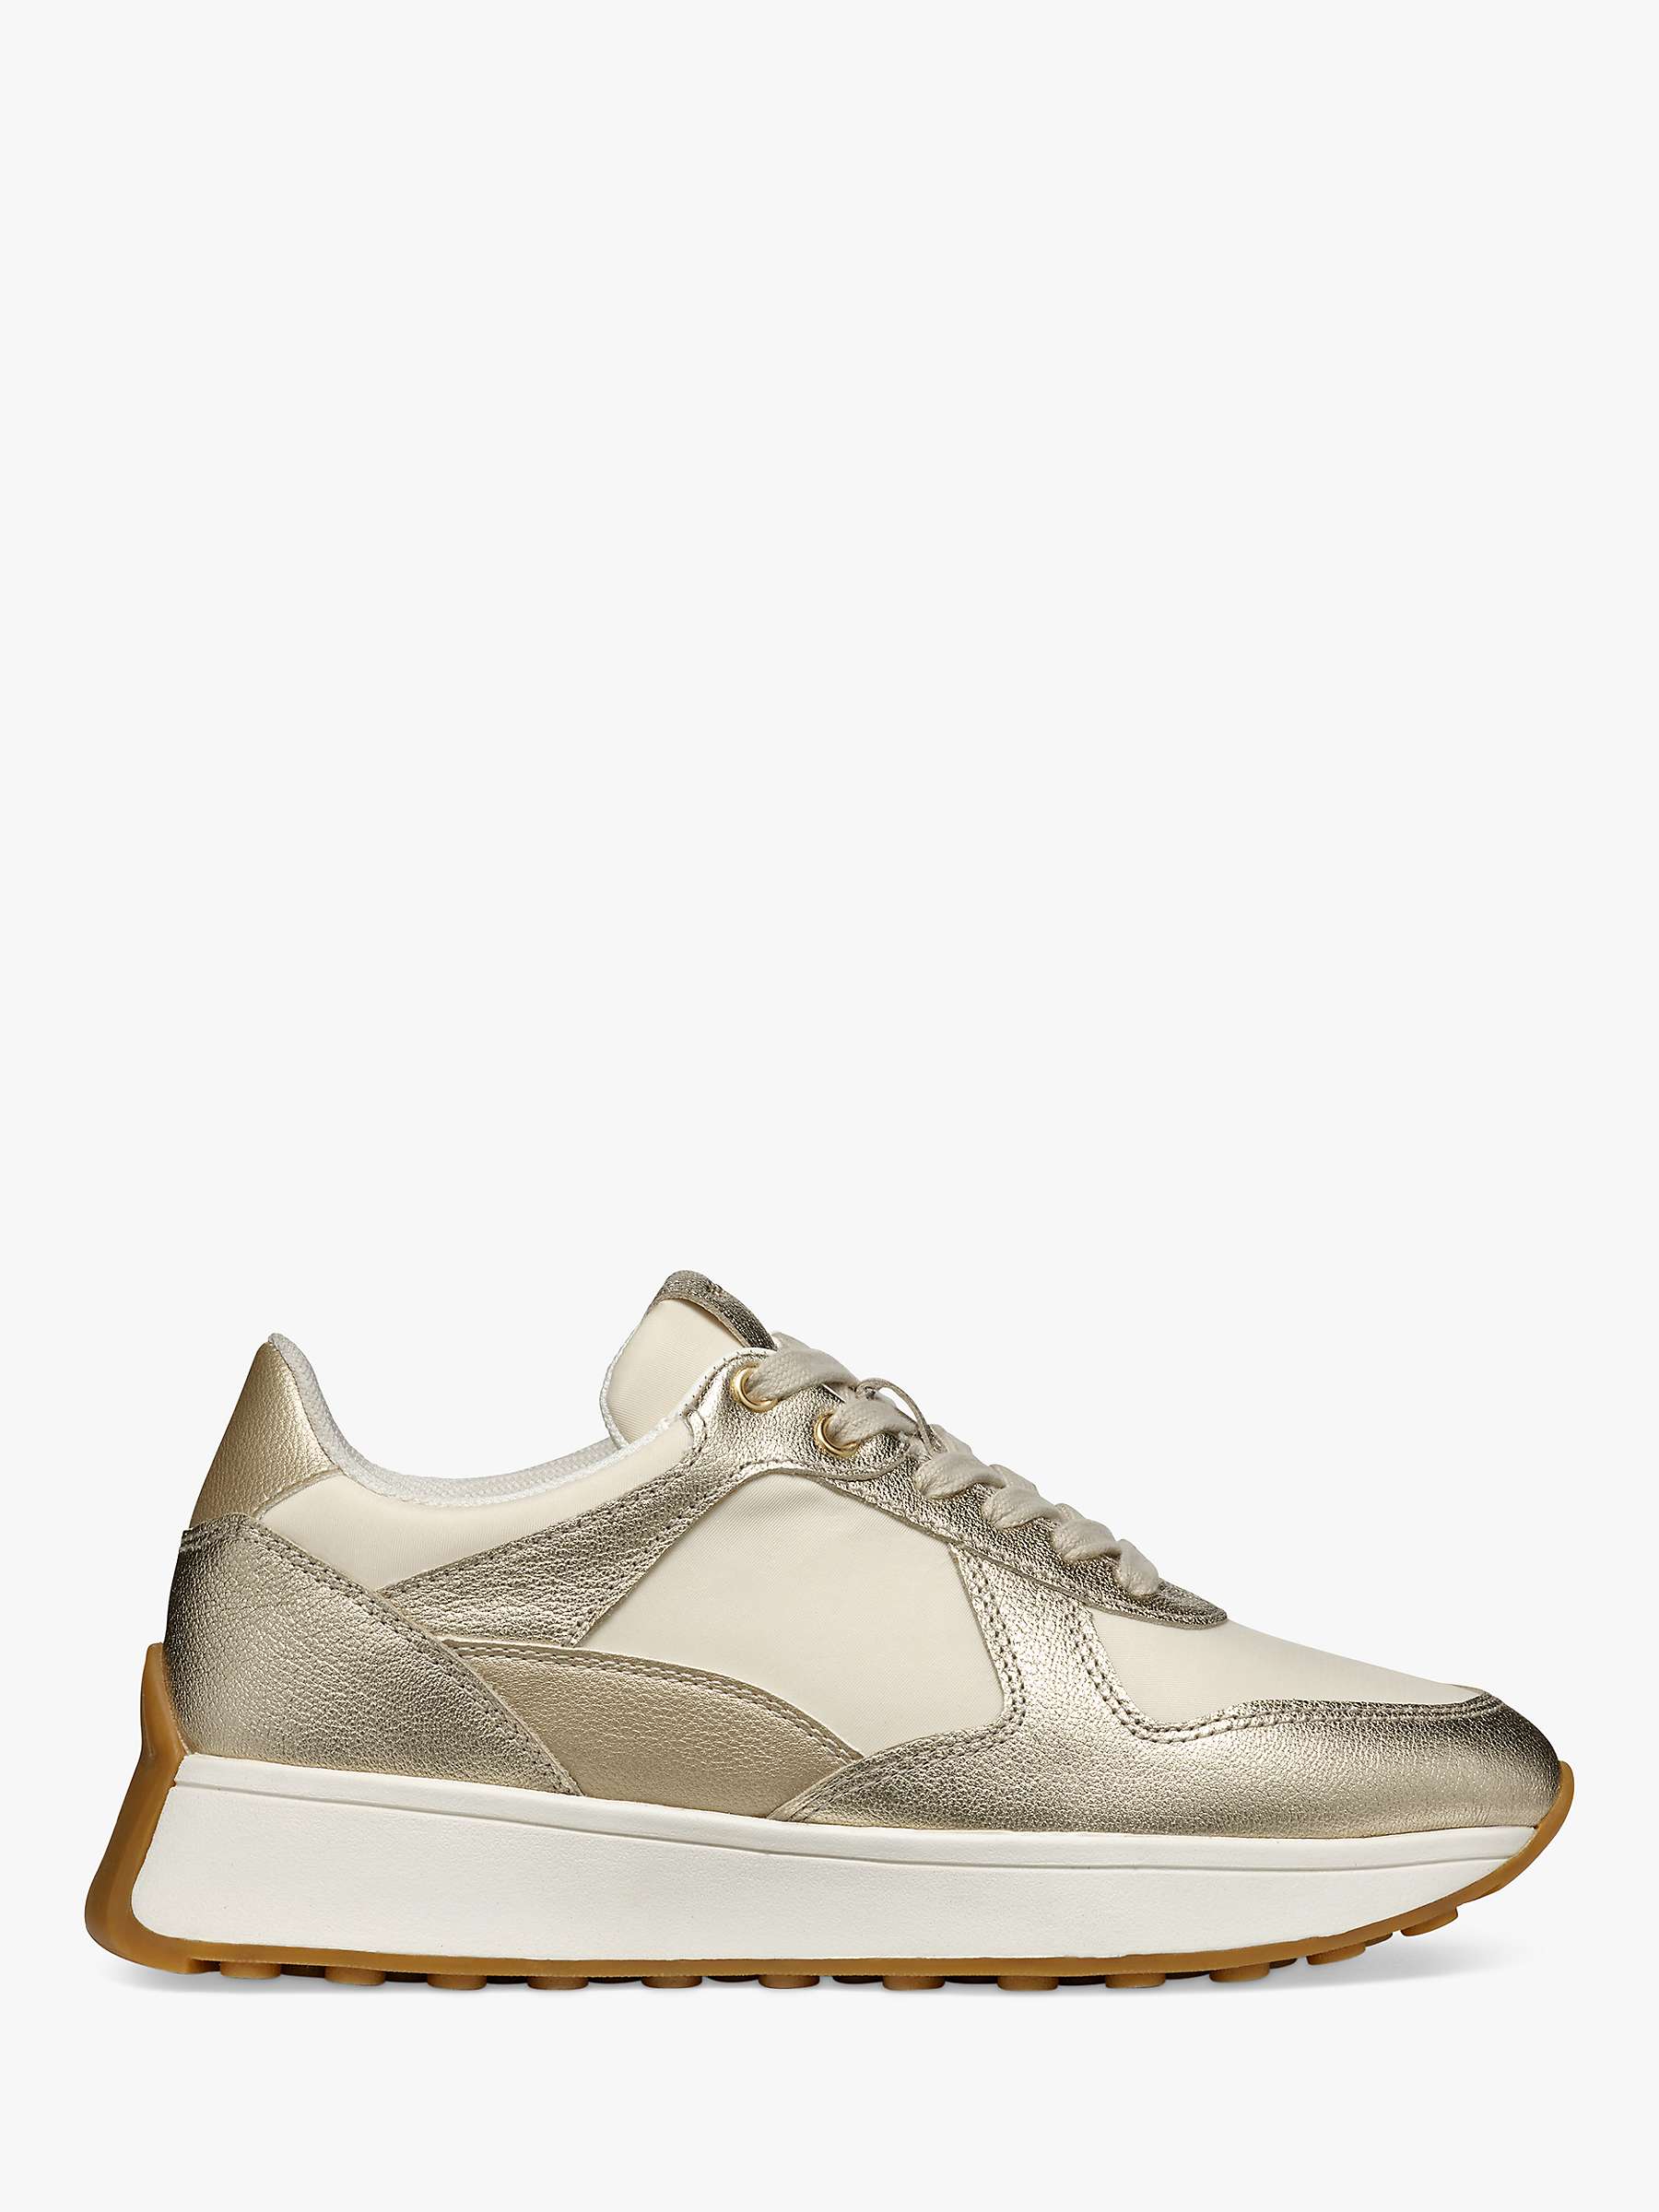 Buy Geox Amabel Retro Lace-Up Trainers, Gold/Light Taupe Online at johnlewis.com